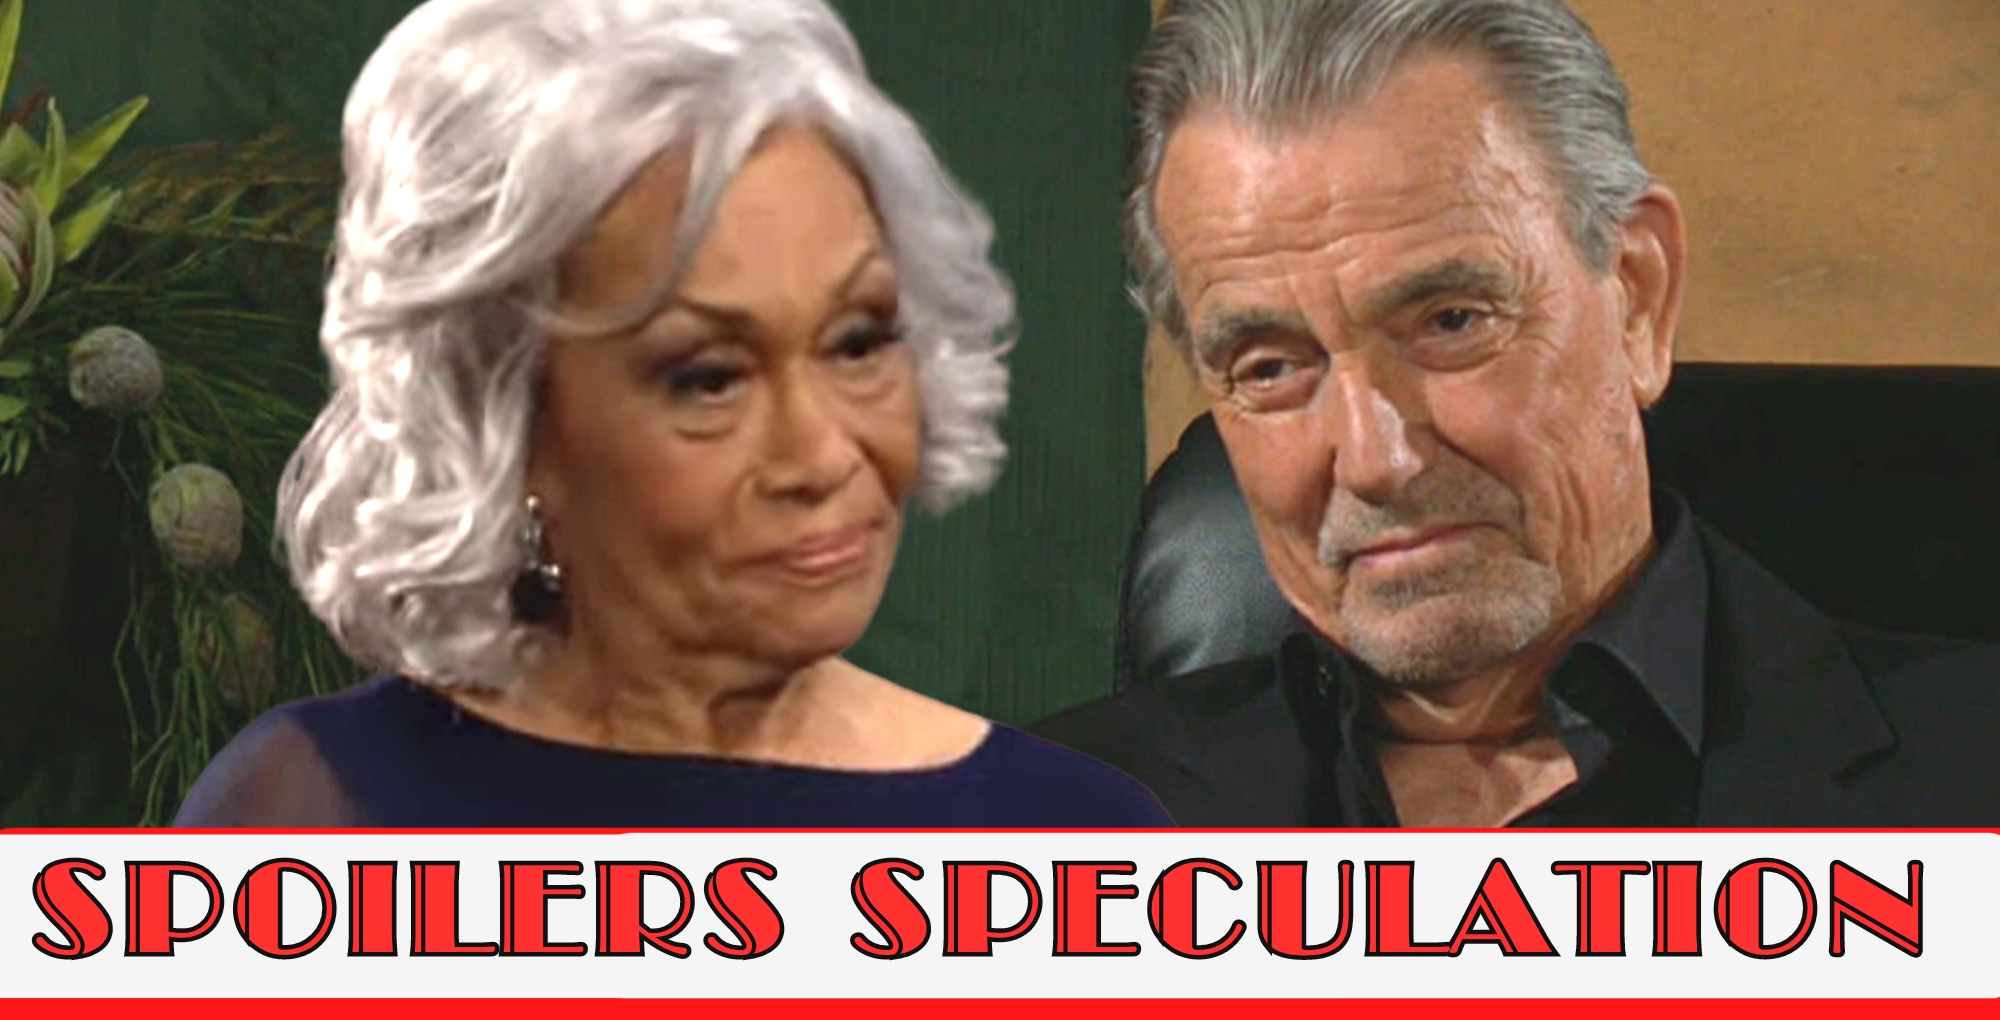 y&r spoilers speculation banner over mamie and victor.